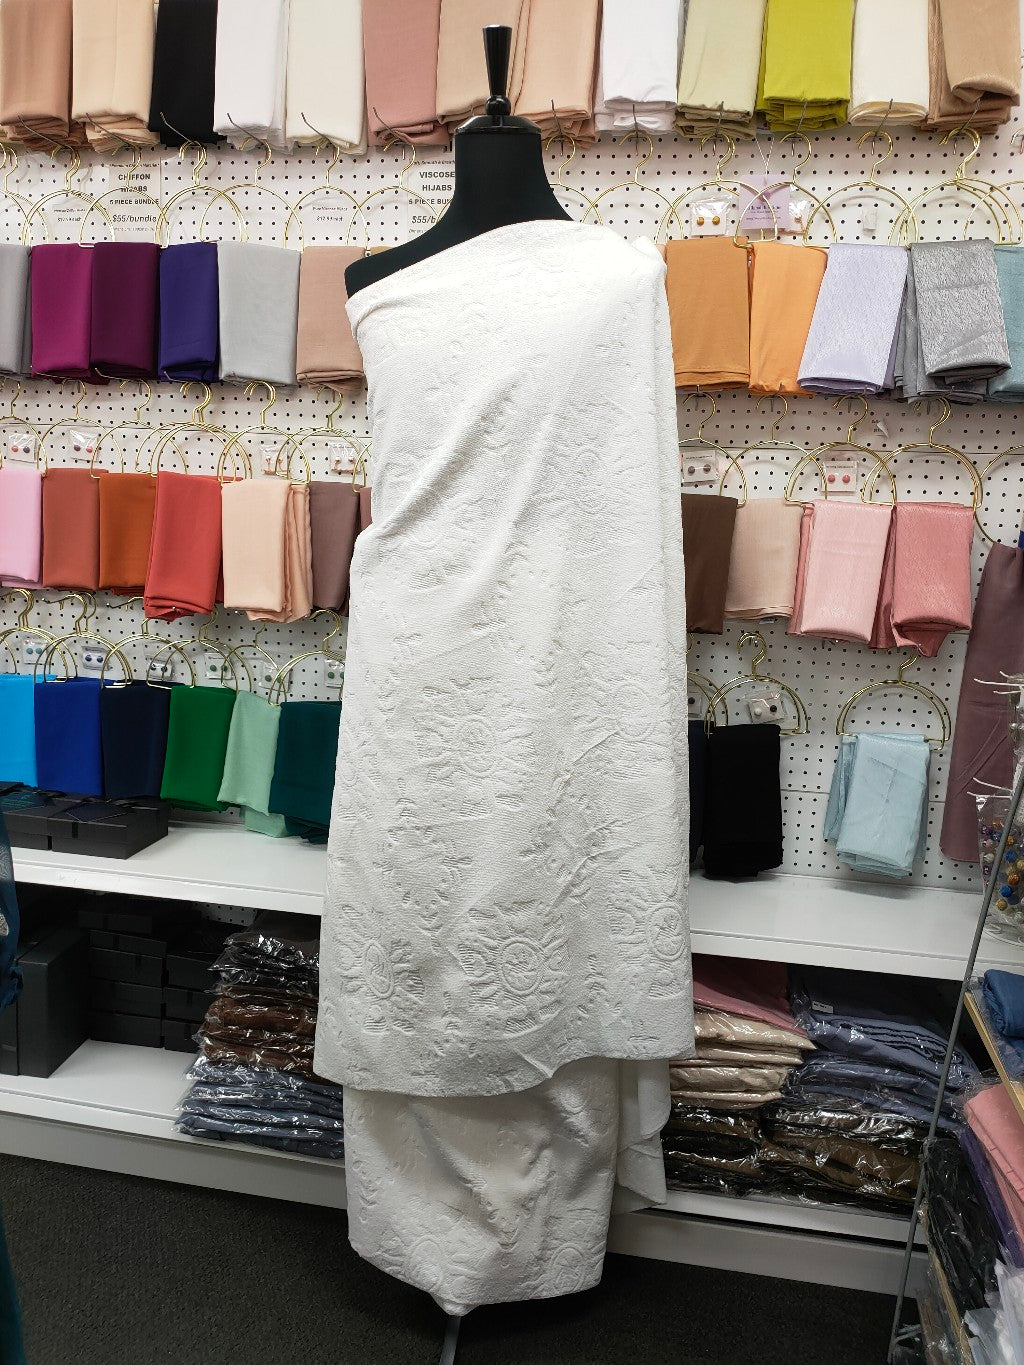 Elevate your pilgrimage with our premium Ihram 2 piece set, crafted from high-quality microfiber material. It is an extra long ihram measuring 235cm by 110cm. Perfect for Hajj & Umrah, shop now at Hikmah Boutique.